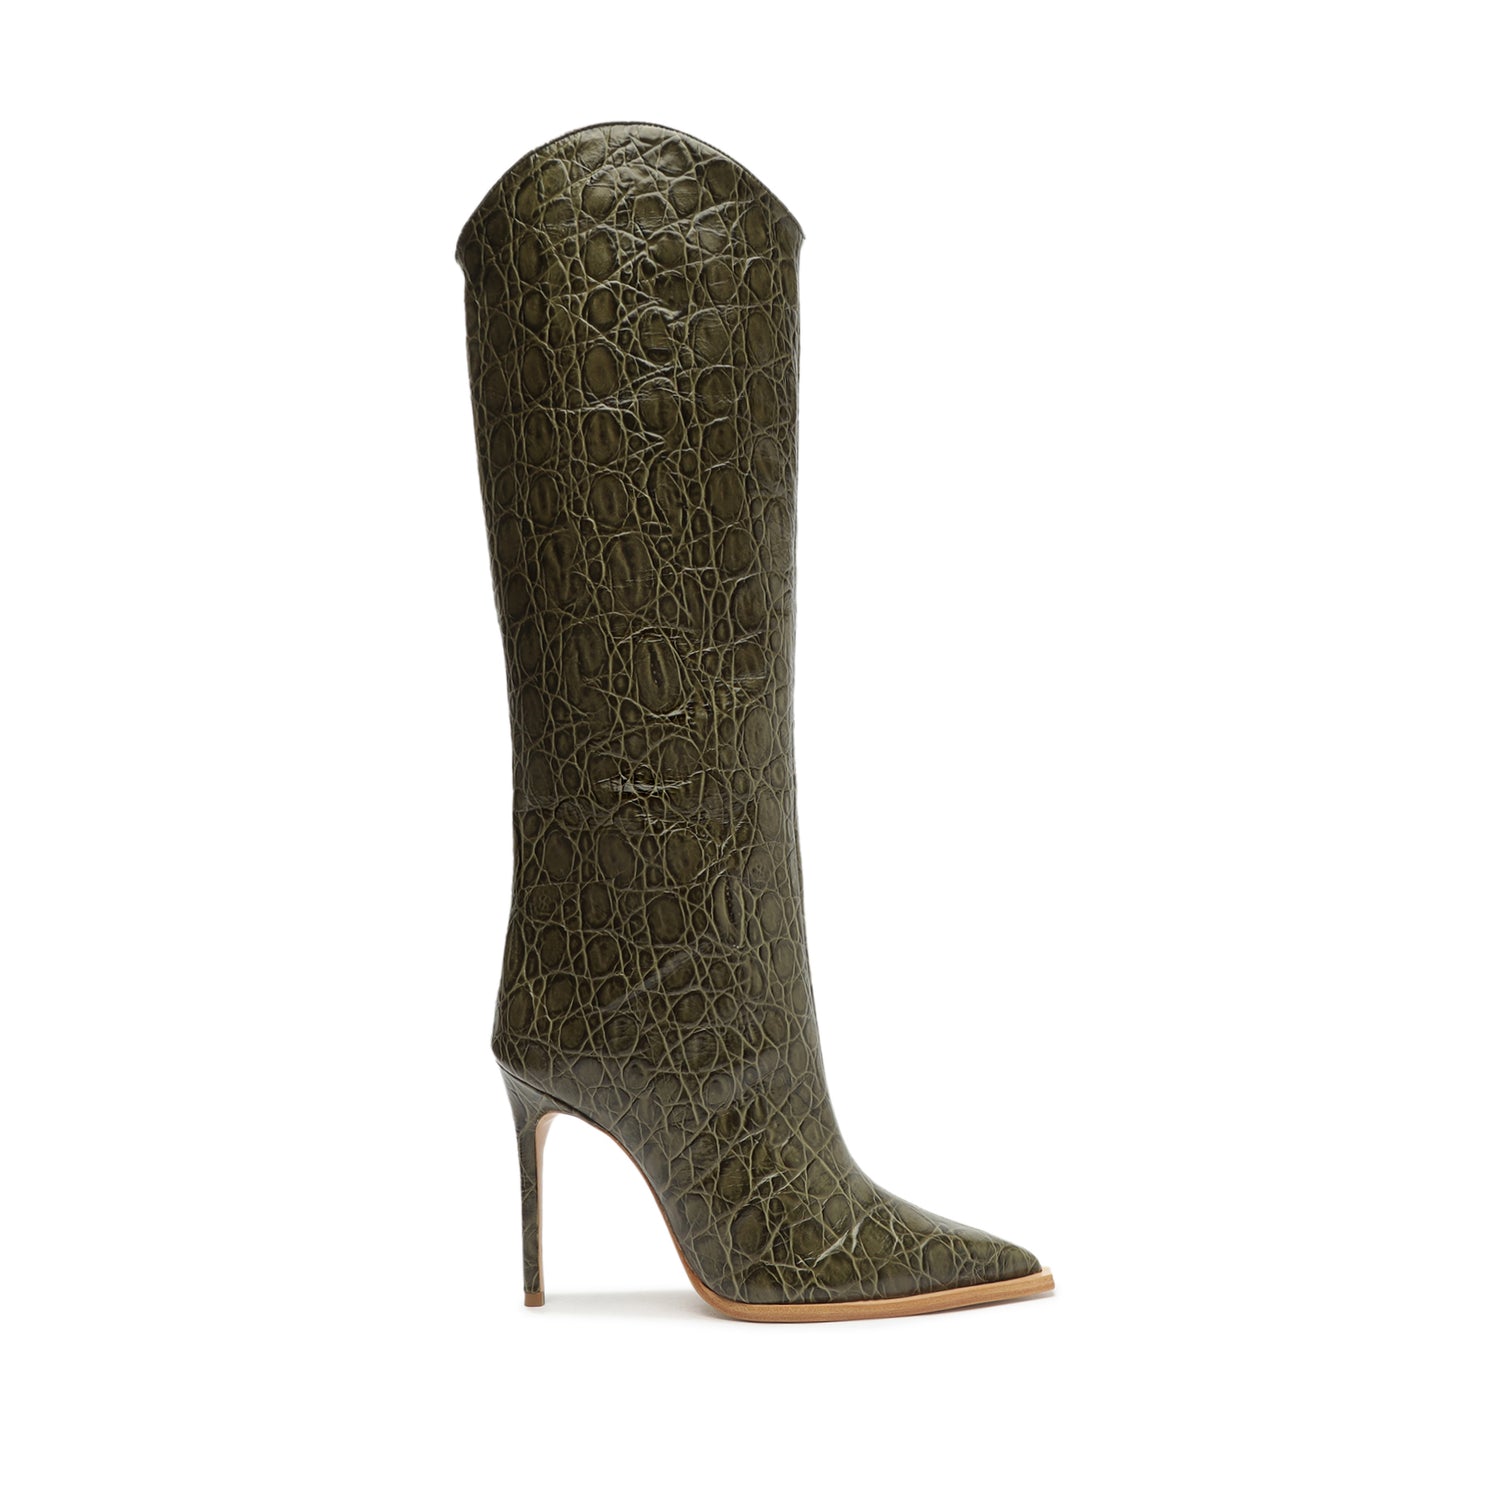 Maryana Welt Wild Leather Boot Boots OLD 5 Military Green Crocodile-Embossed Leather - Schutz Shoes